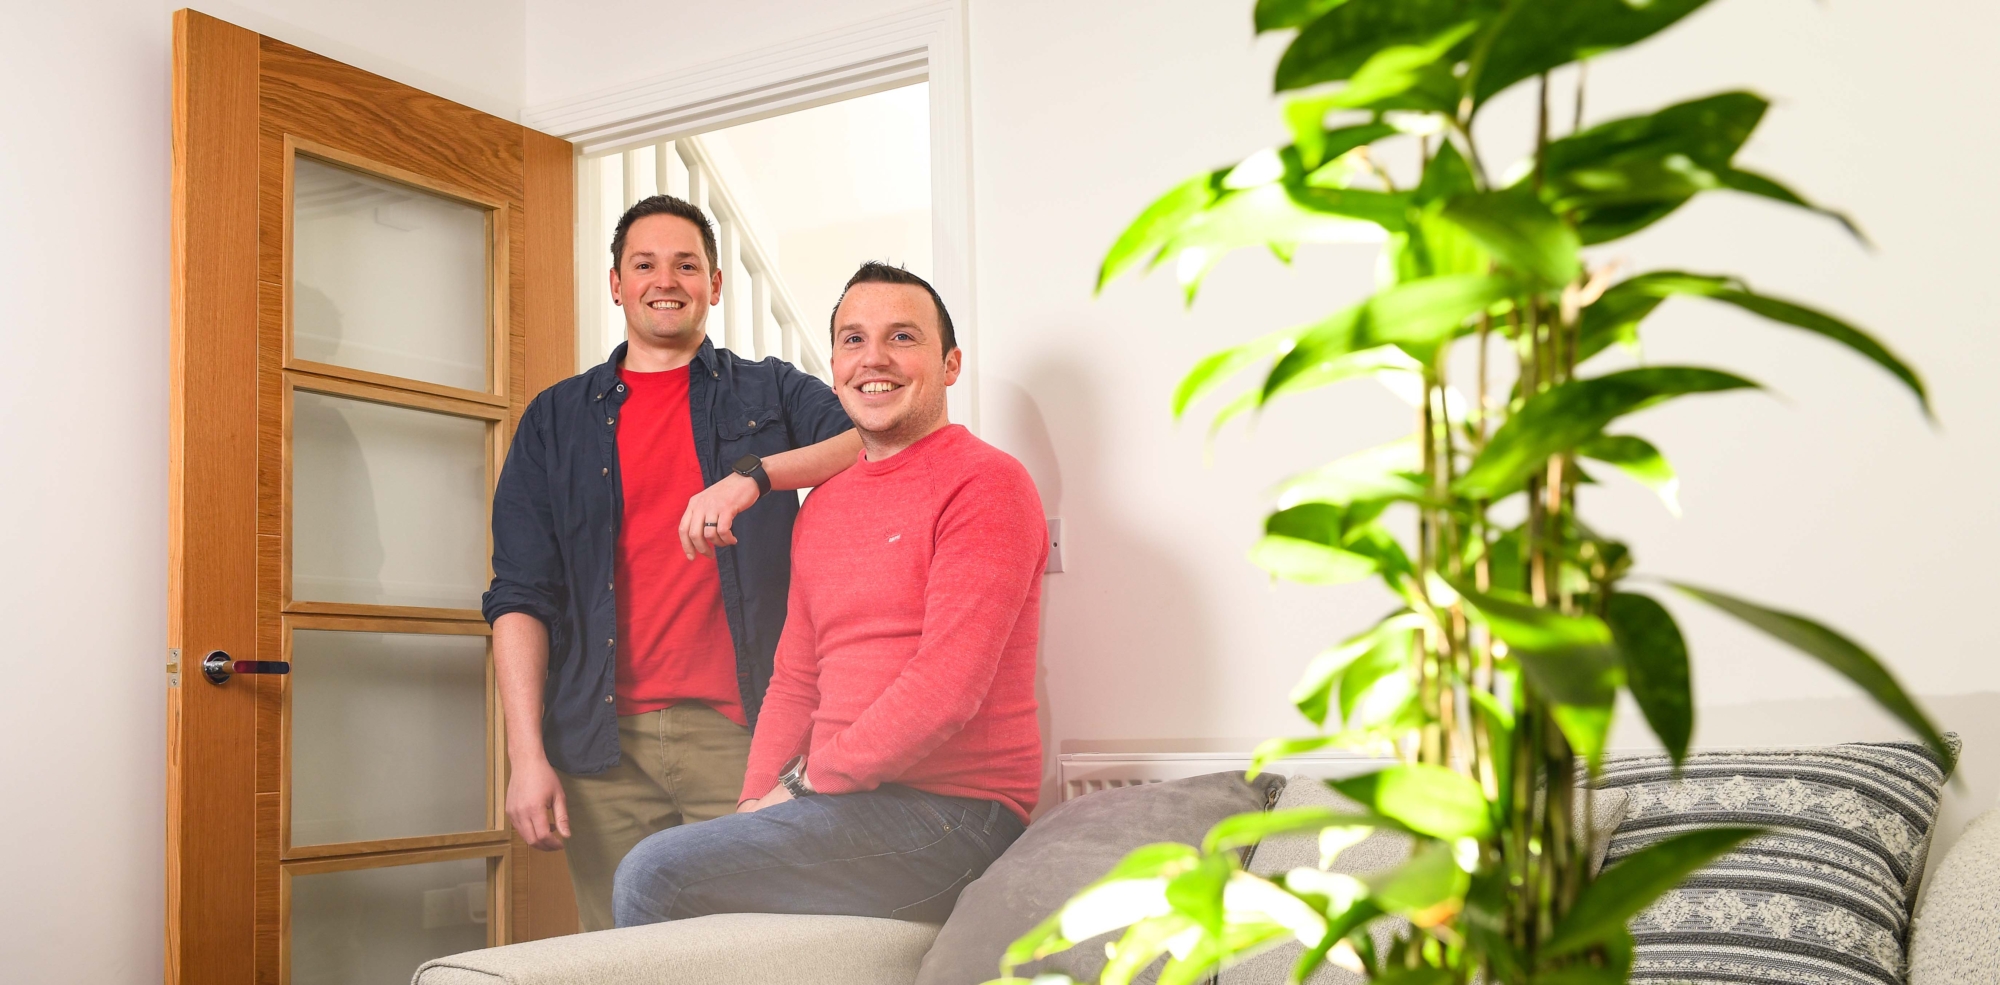 Home ‘town’ is where the heart is as Joel and James find their perfect home